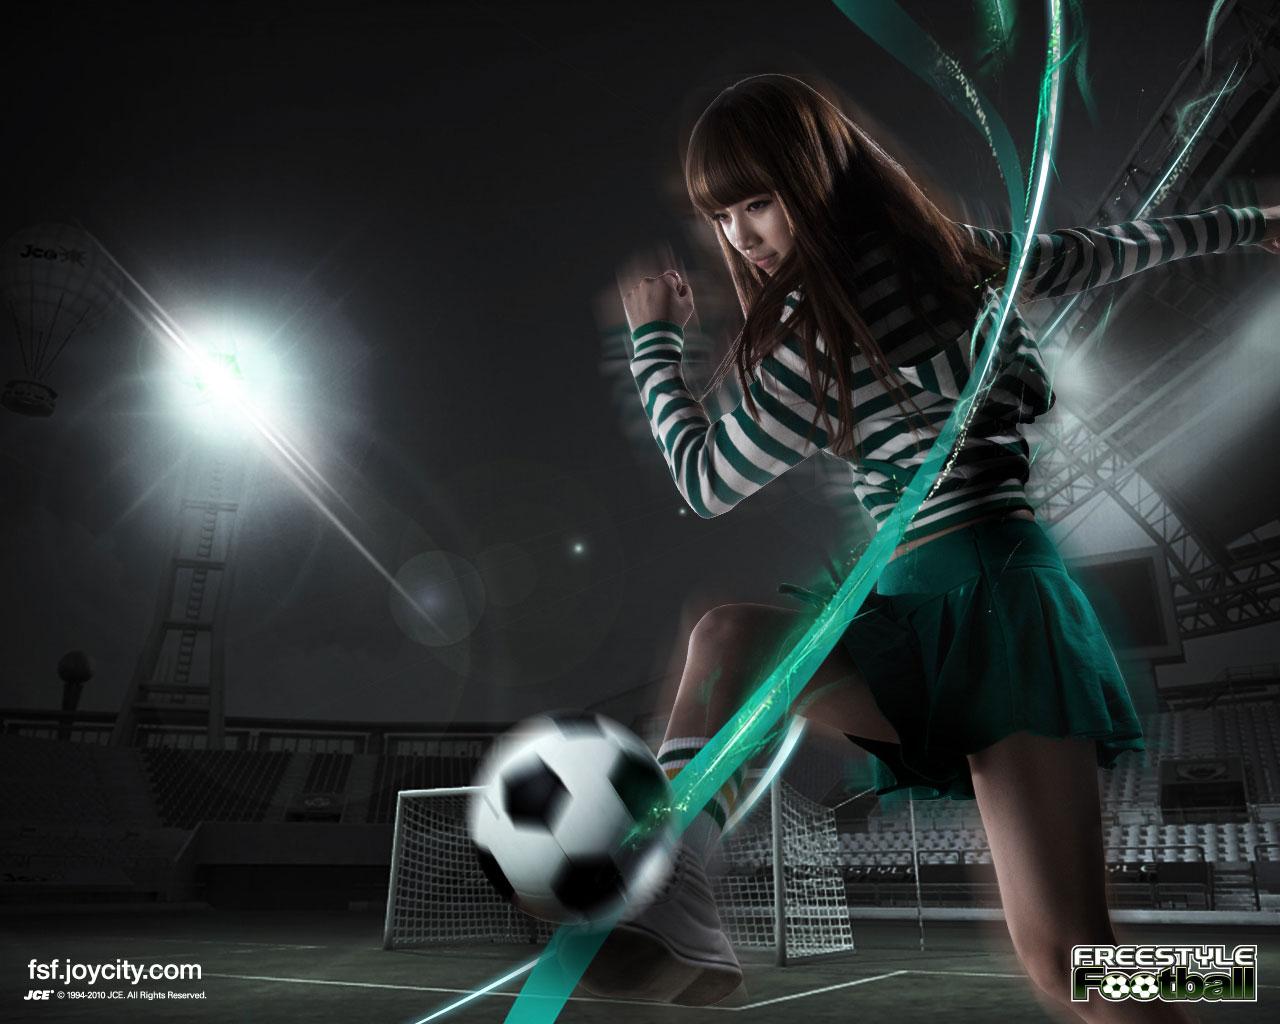 MISS A: Miss A Freestyle Football